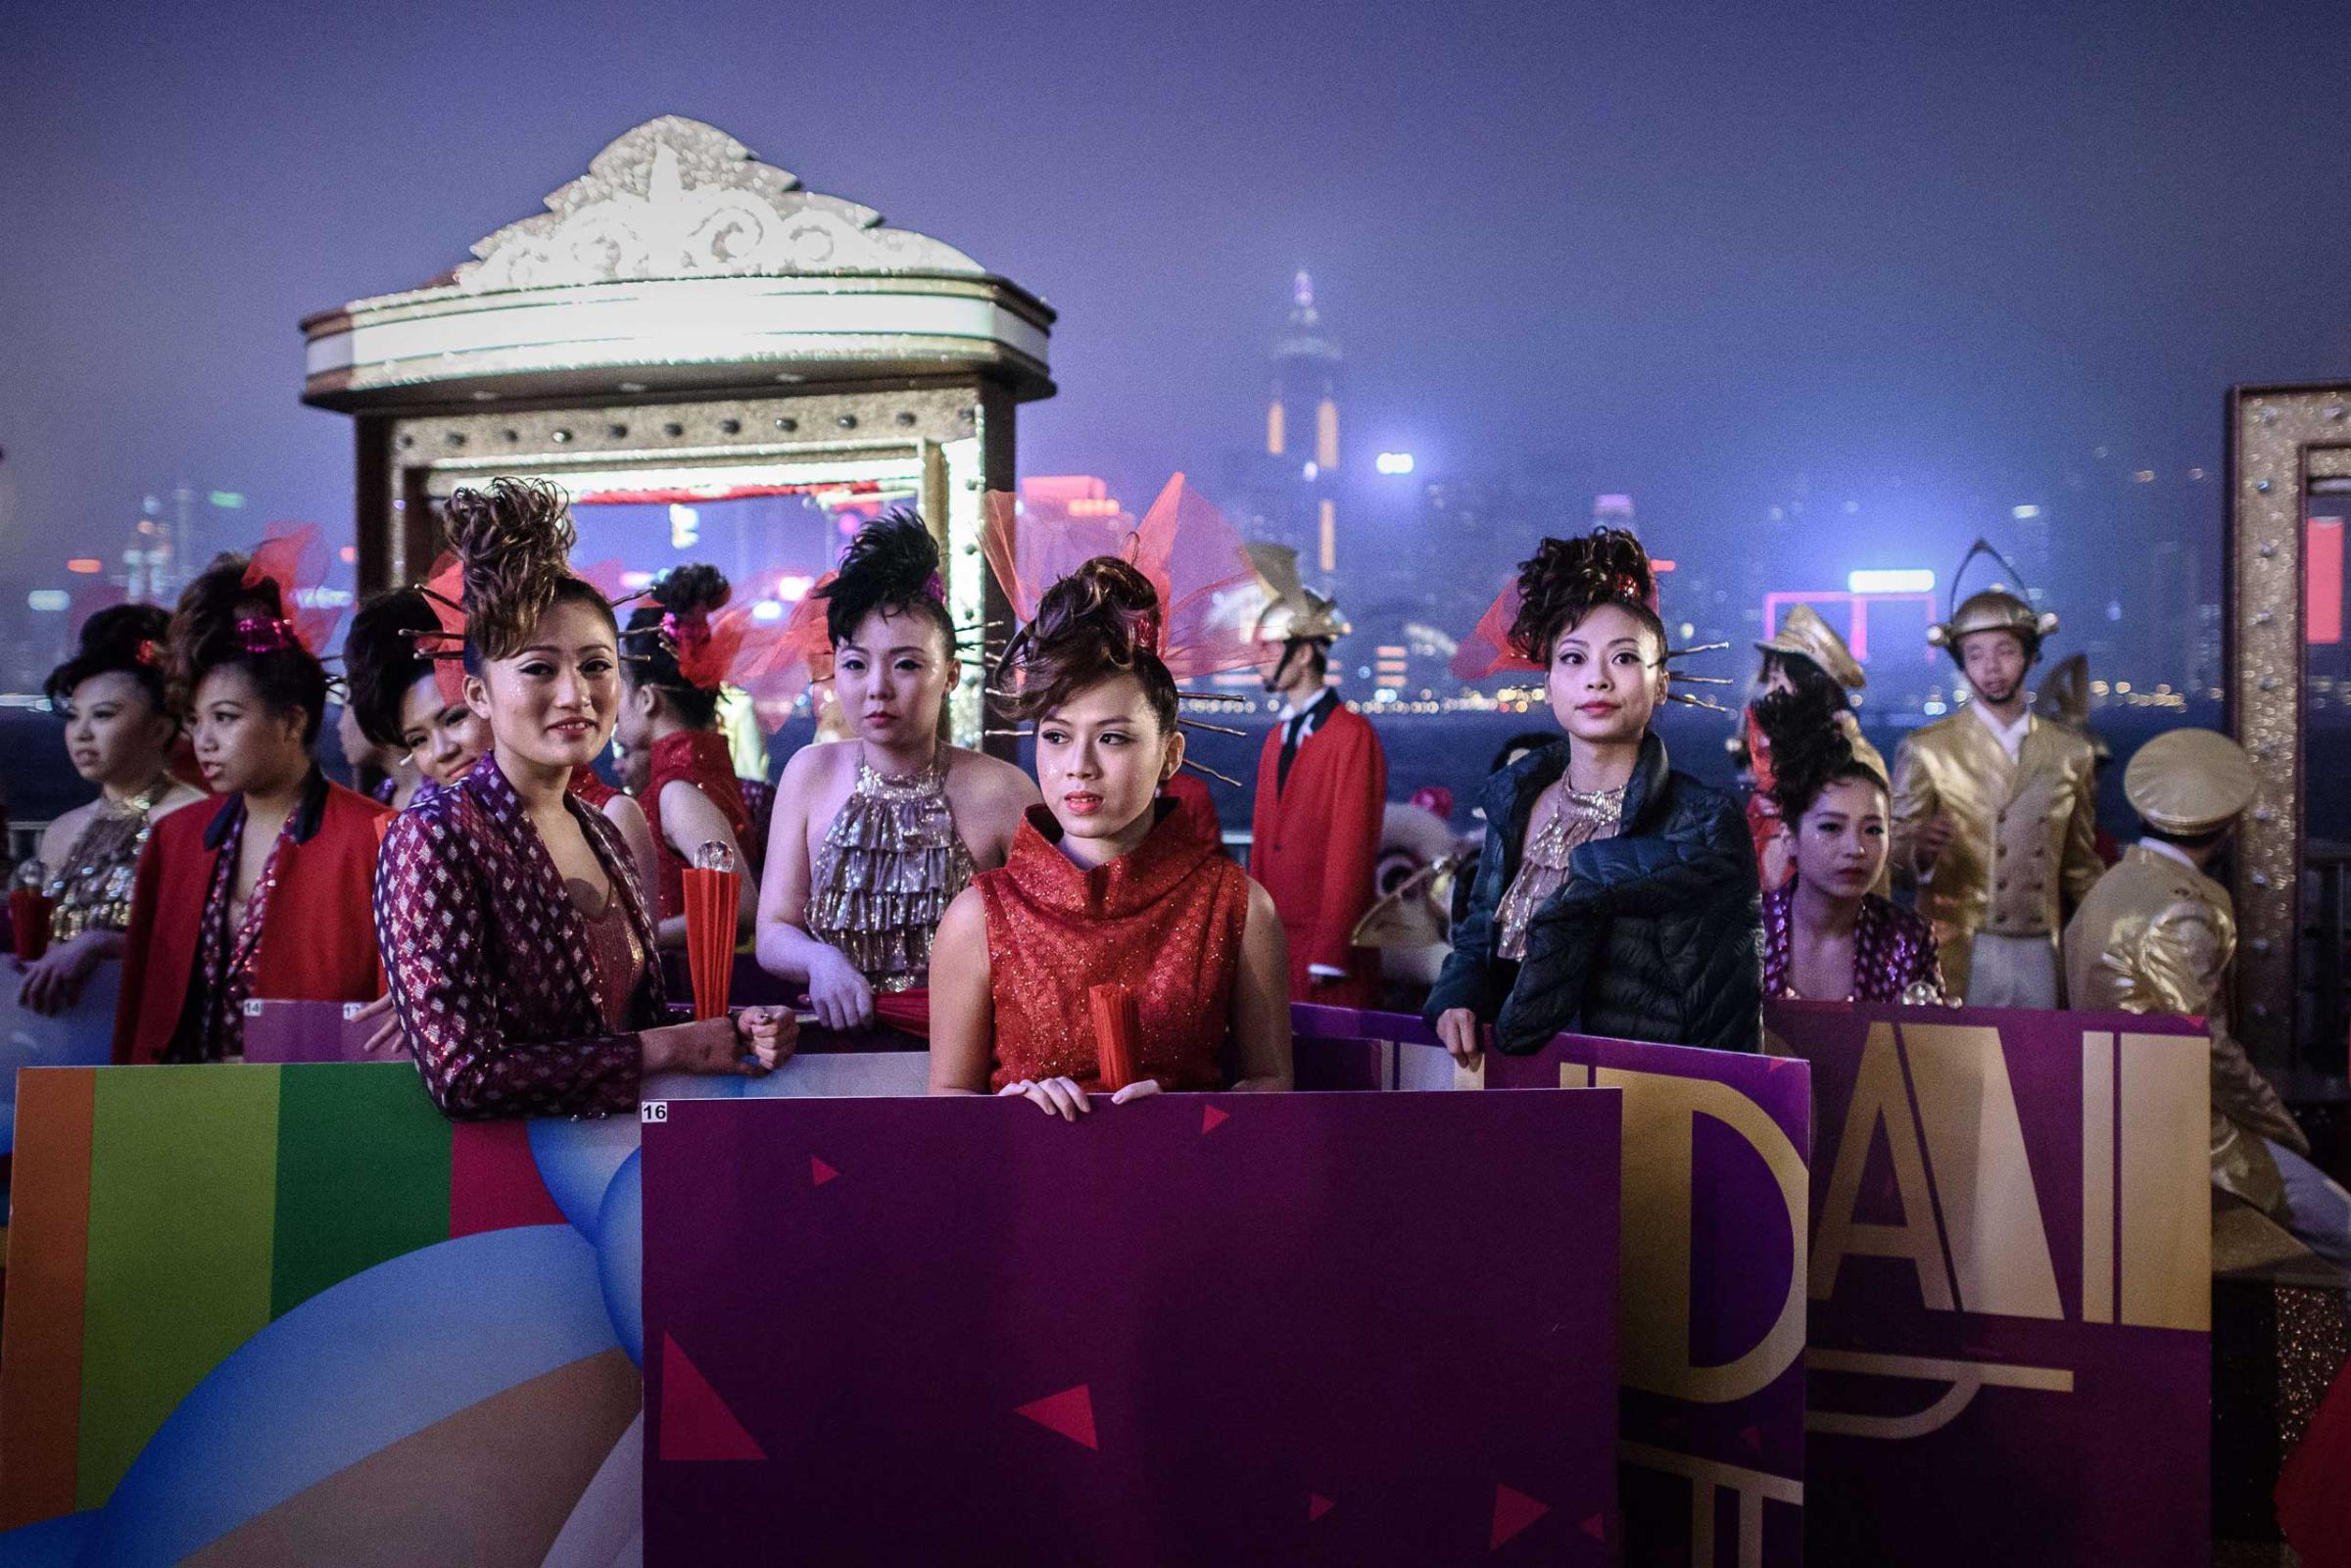 Performers wait for the start of the celebrations of the Chinese Lunar New "Year of the Sheep" in Hong Kong on Feb. 19, 2015.